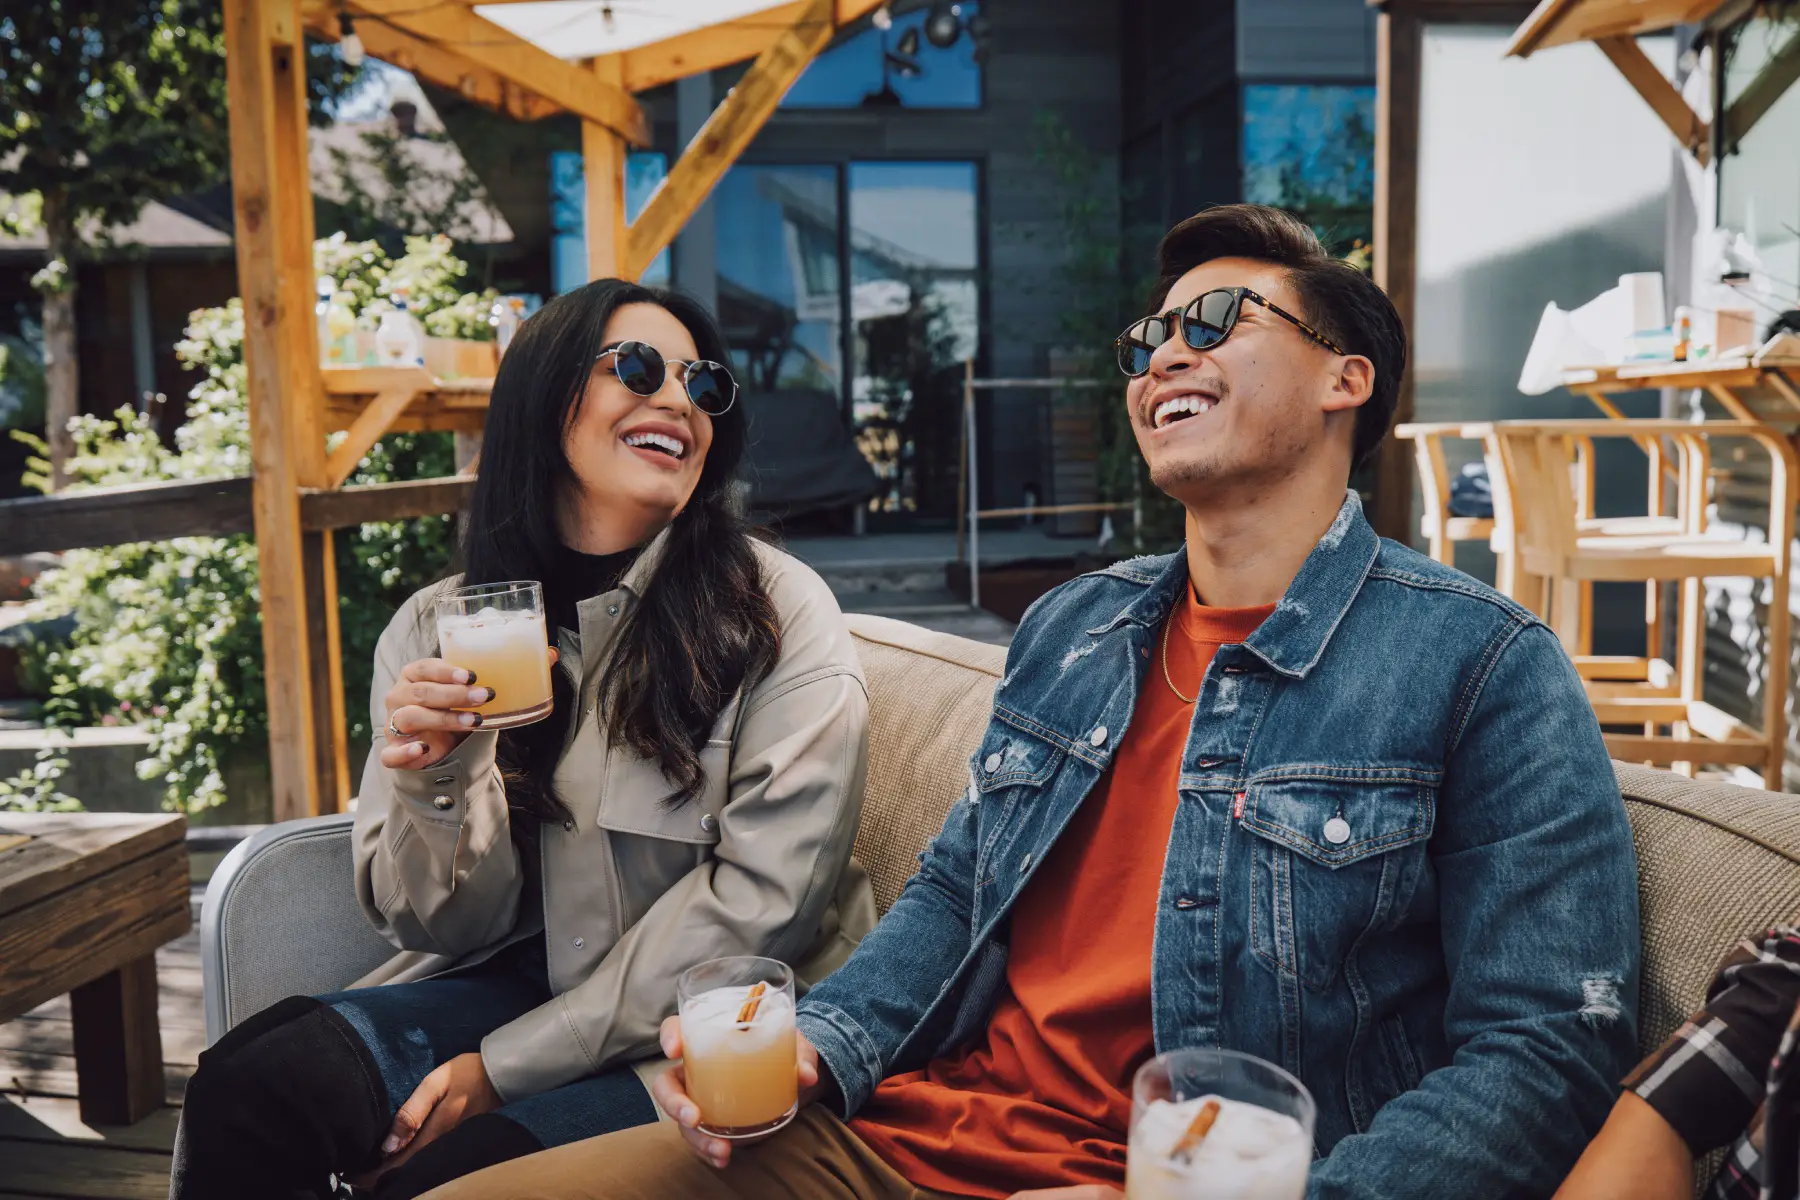 two single people (a man and woman) relaxing and laughing while enjoying a drink in a beer garden